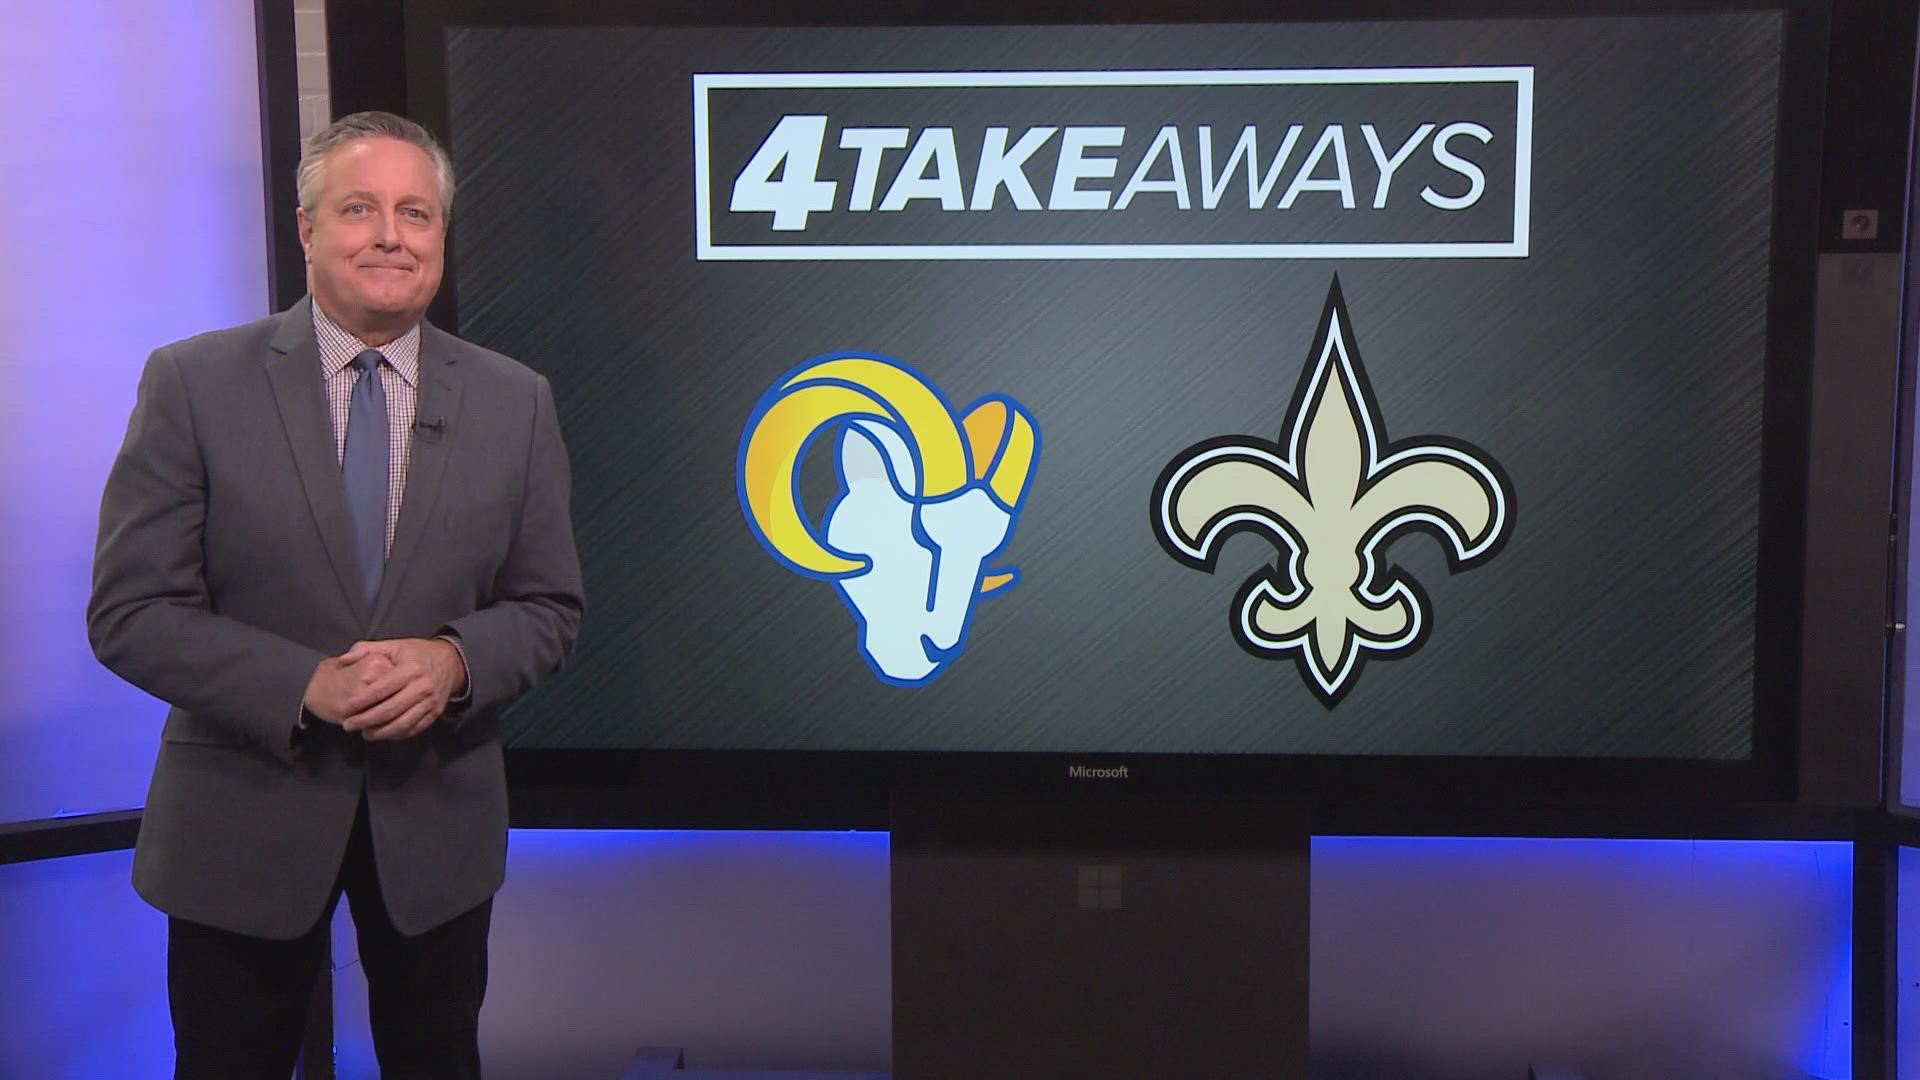 Football outsiders says the Saints have a 6.6 percent chance of playing in the postseason.